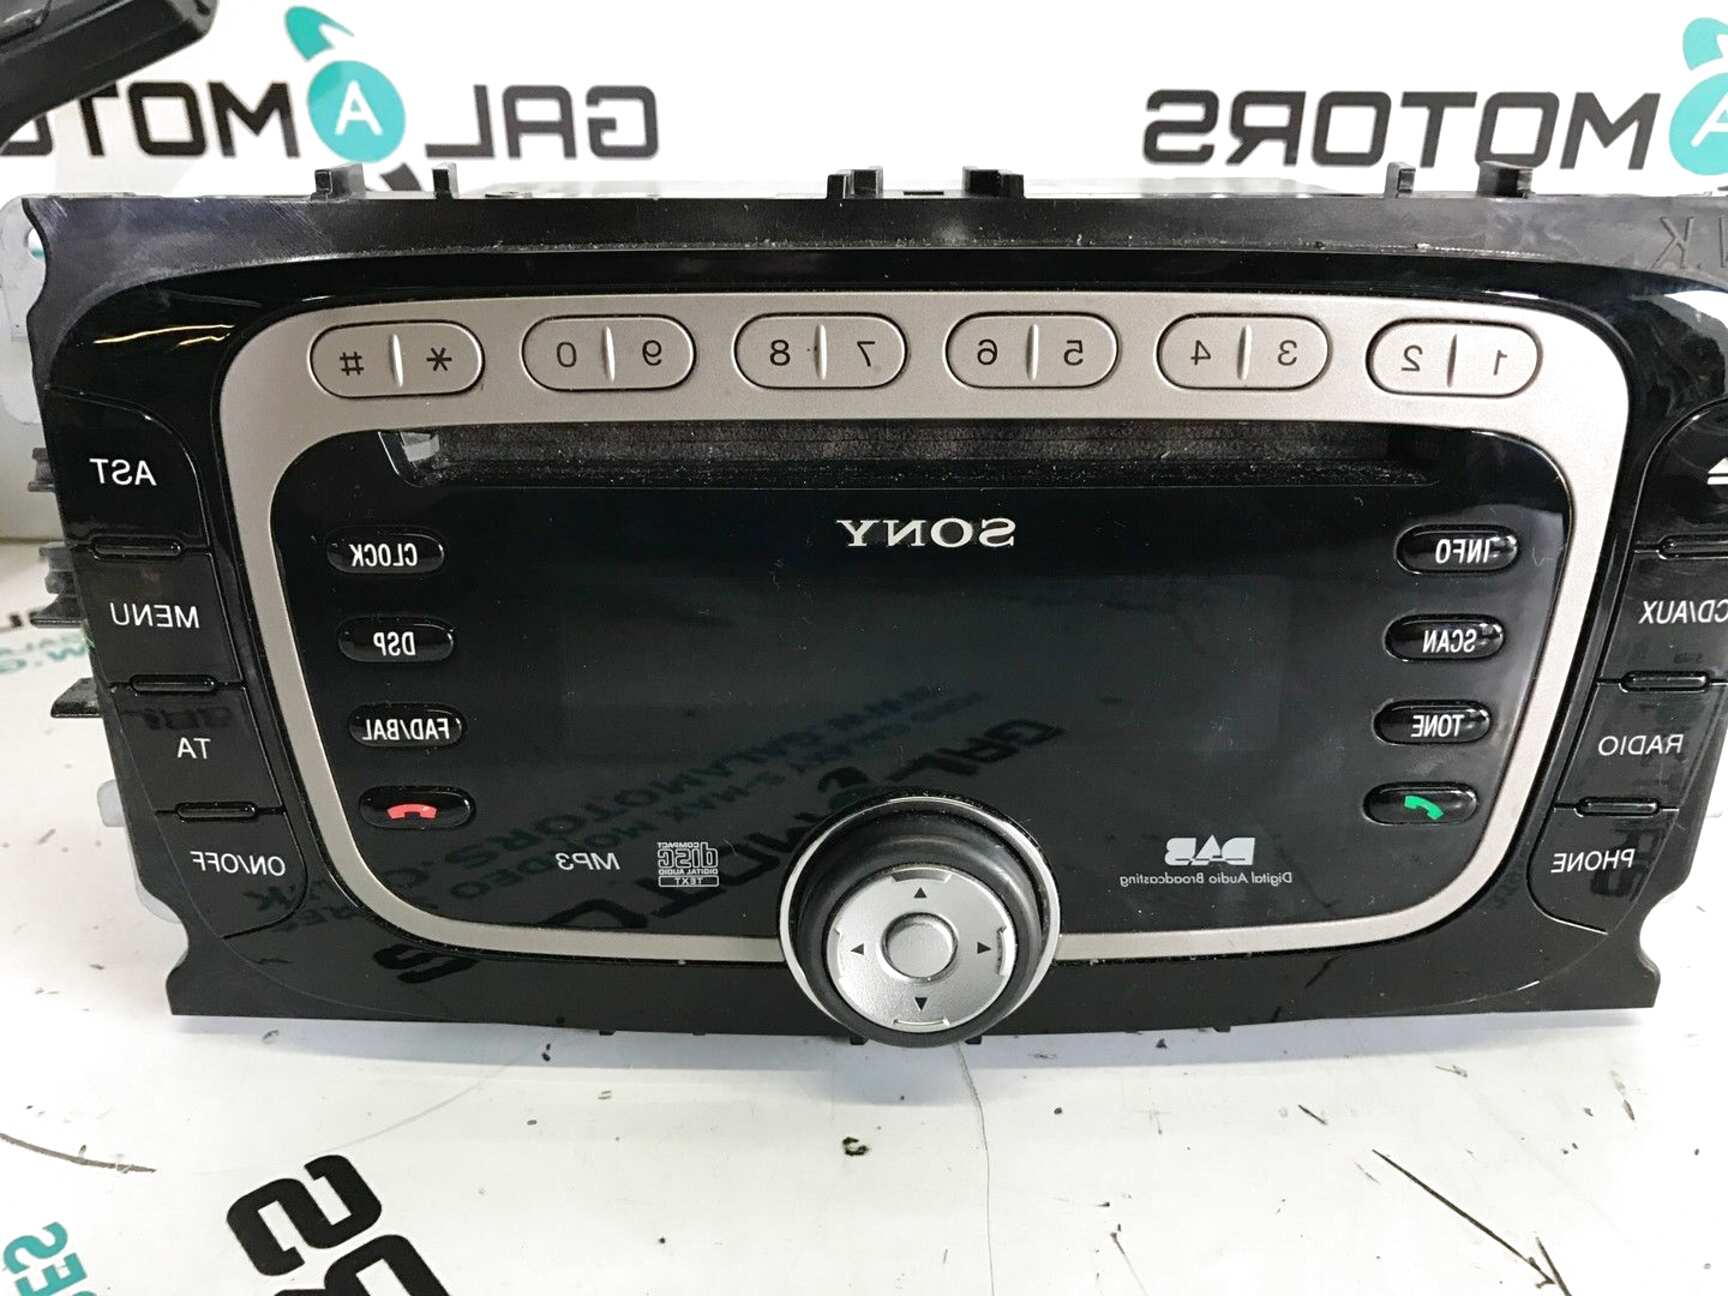 Ford Sony Stereo for sale in UK View 22 bargains